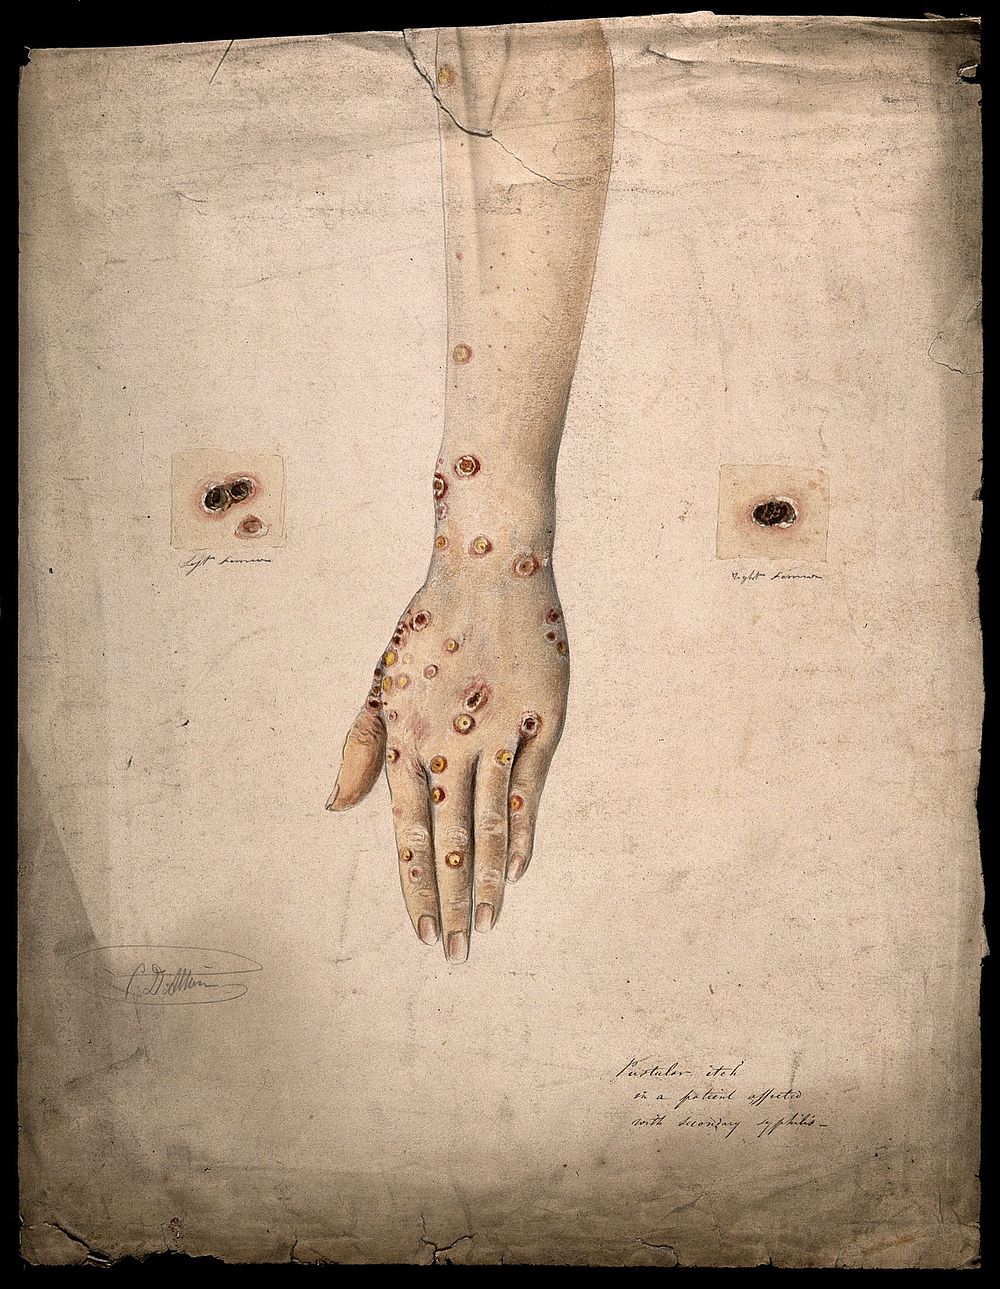 Sores and pustules on the hand and arms of a woman suffering from secondary syphilis. Watercolour by C. D'Alton, 1858.